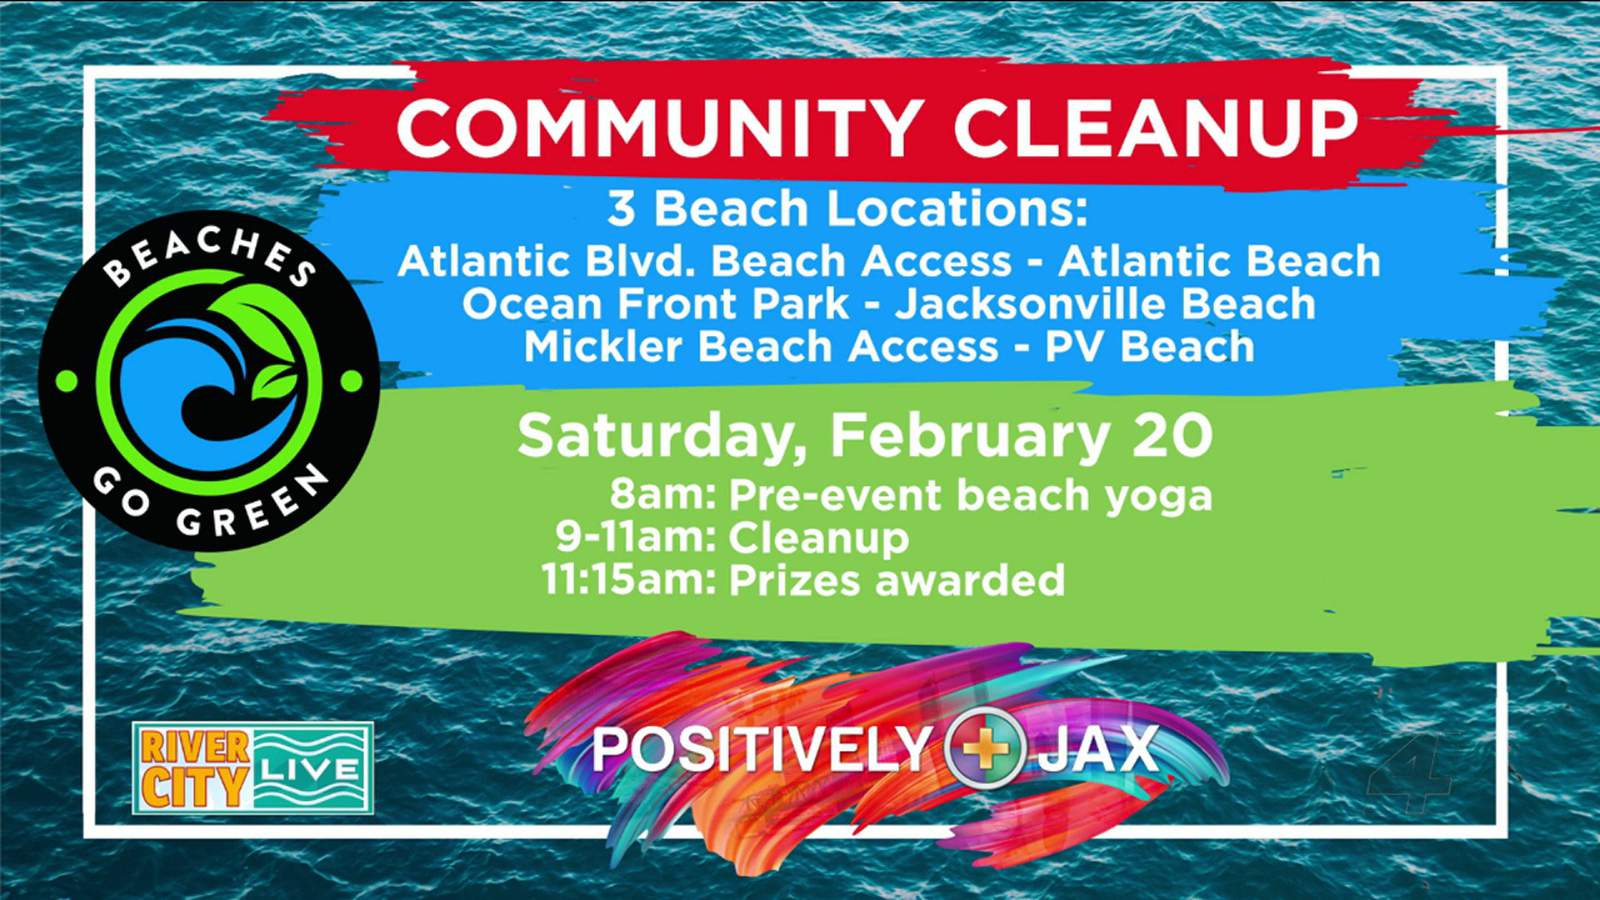 Positively Jax: Help us clean up our community this weekend